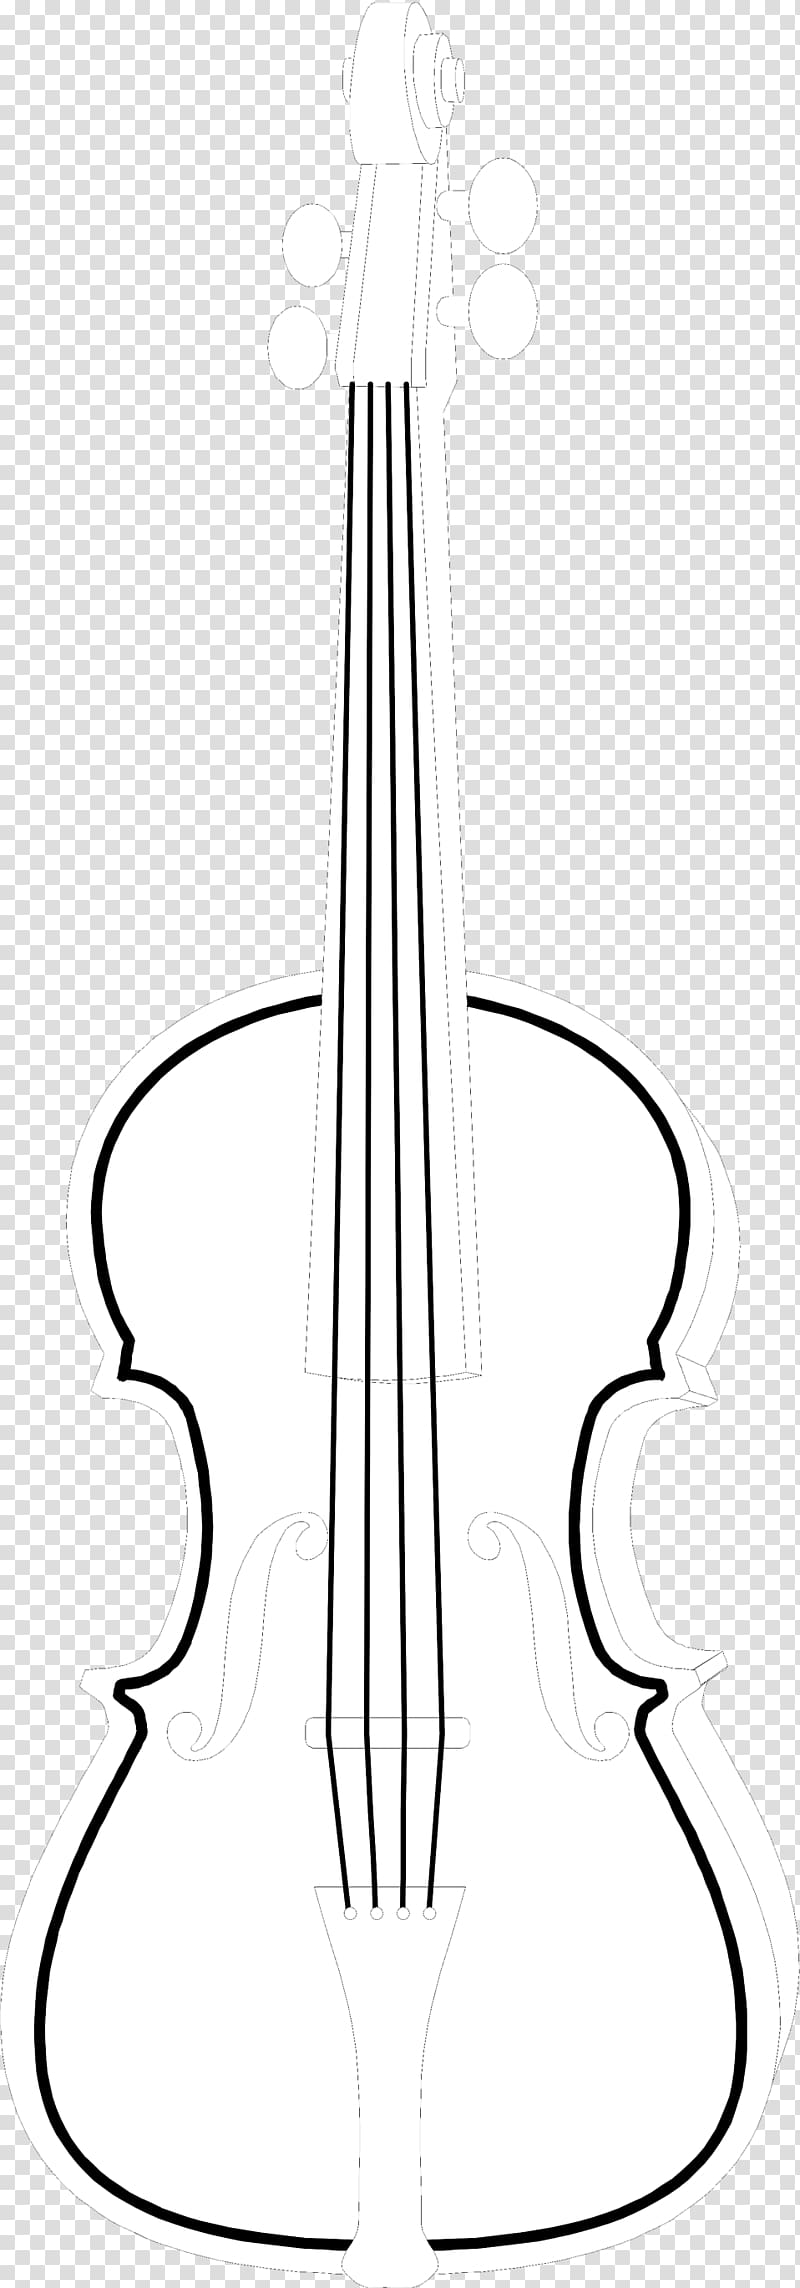 Bass violin Double bass Cello, violin transparent background PNG clipart